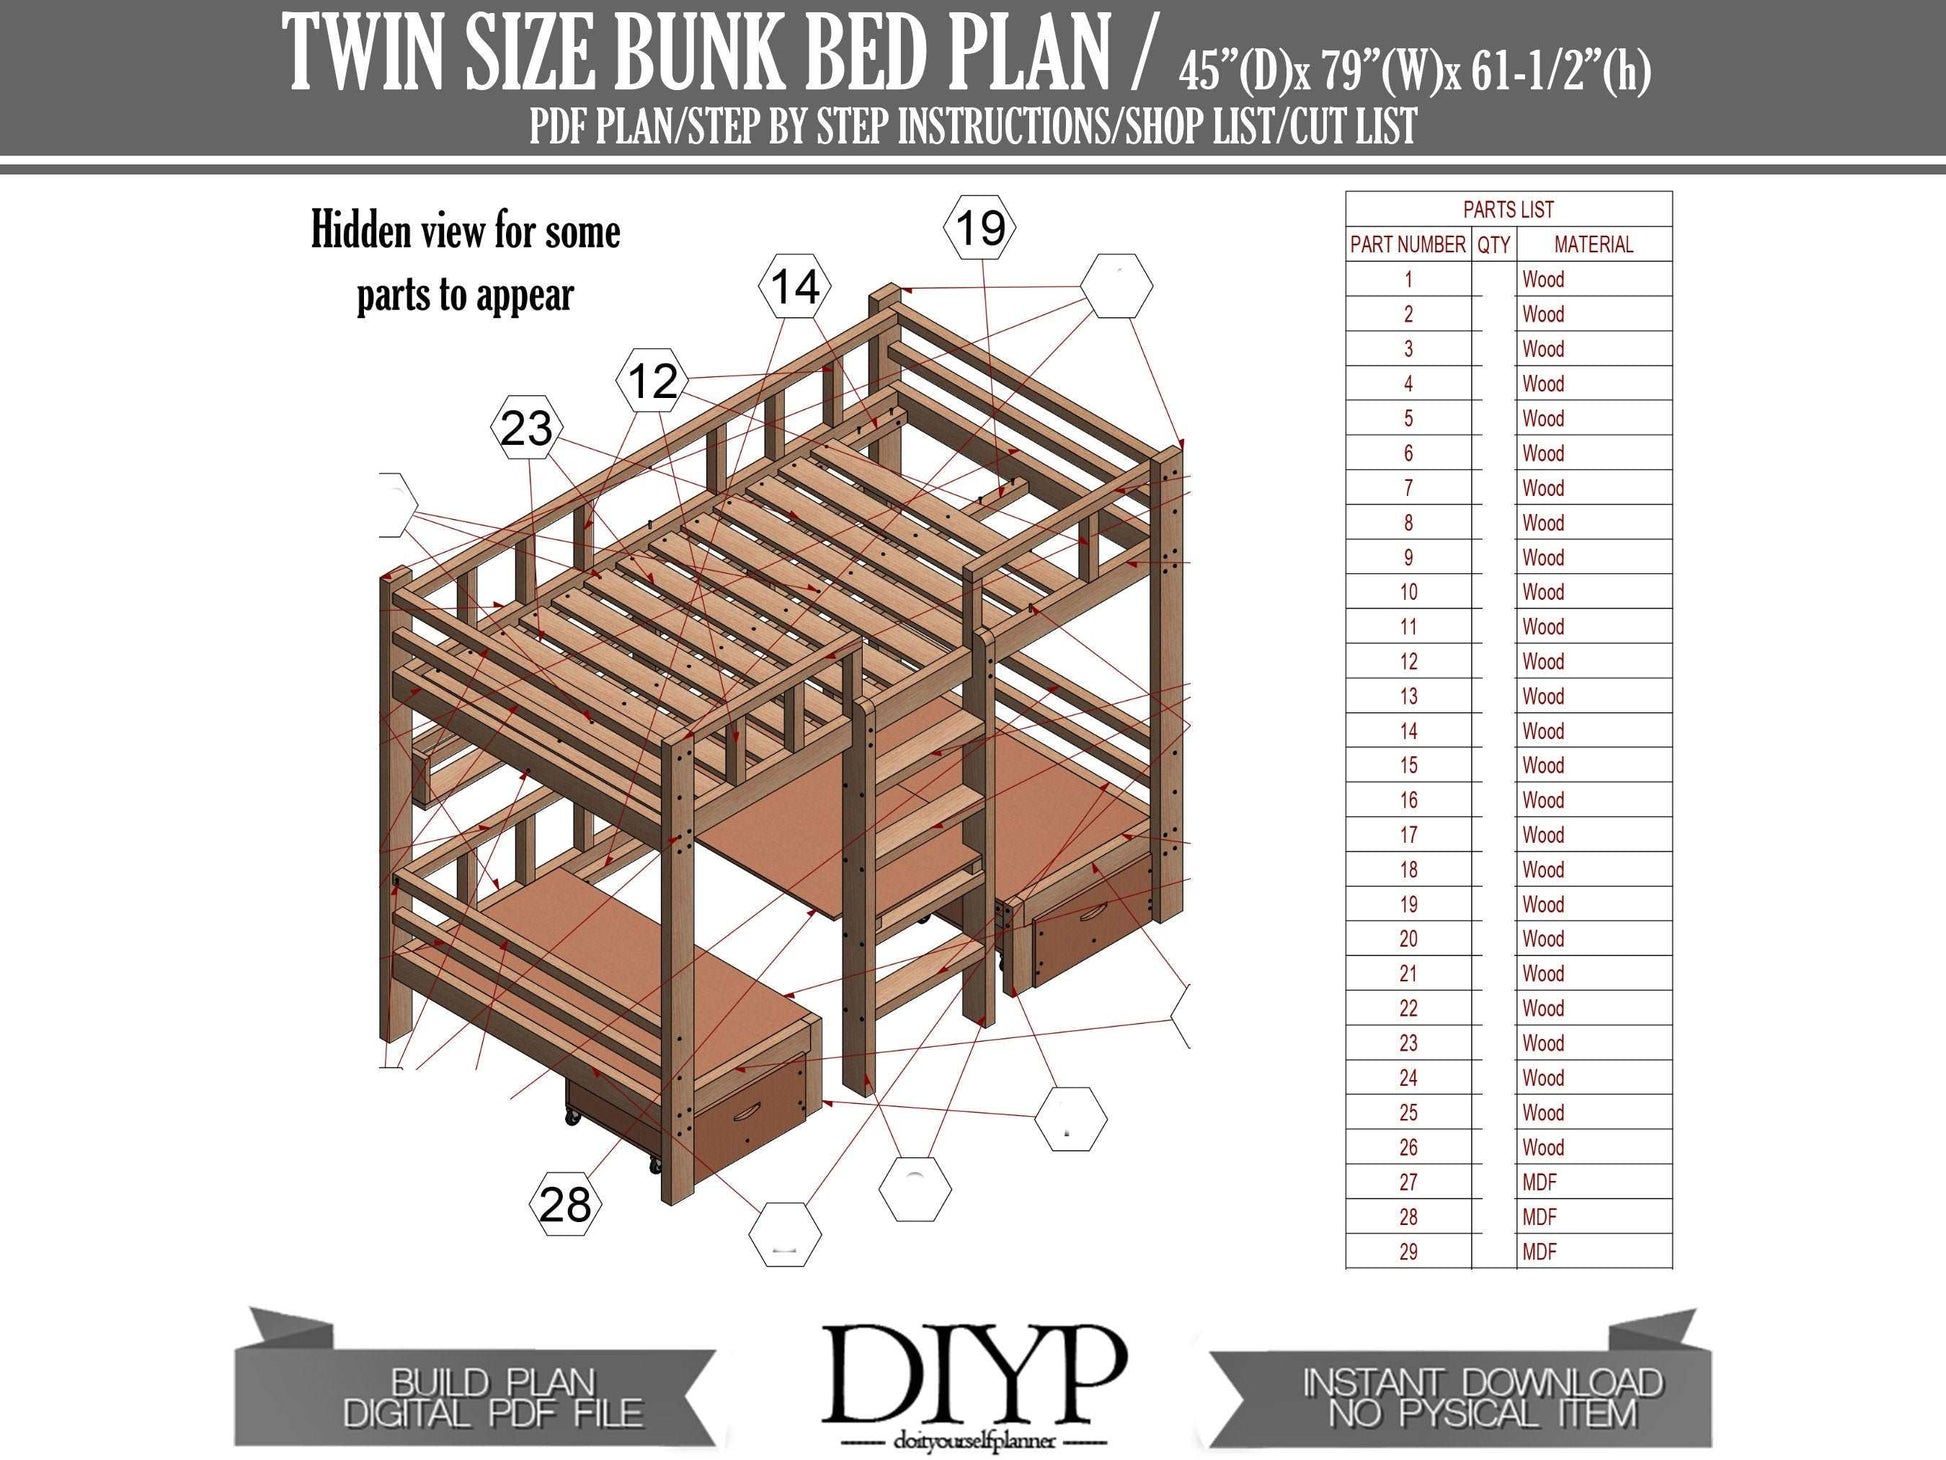 Twin size bunk bed with table - Modern and affordable BunkBed ideas - Woodworking plans for berth